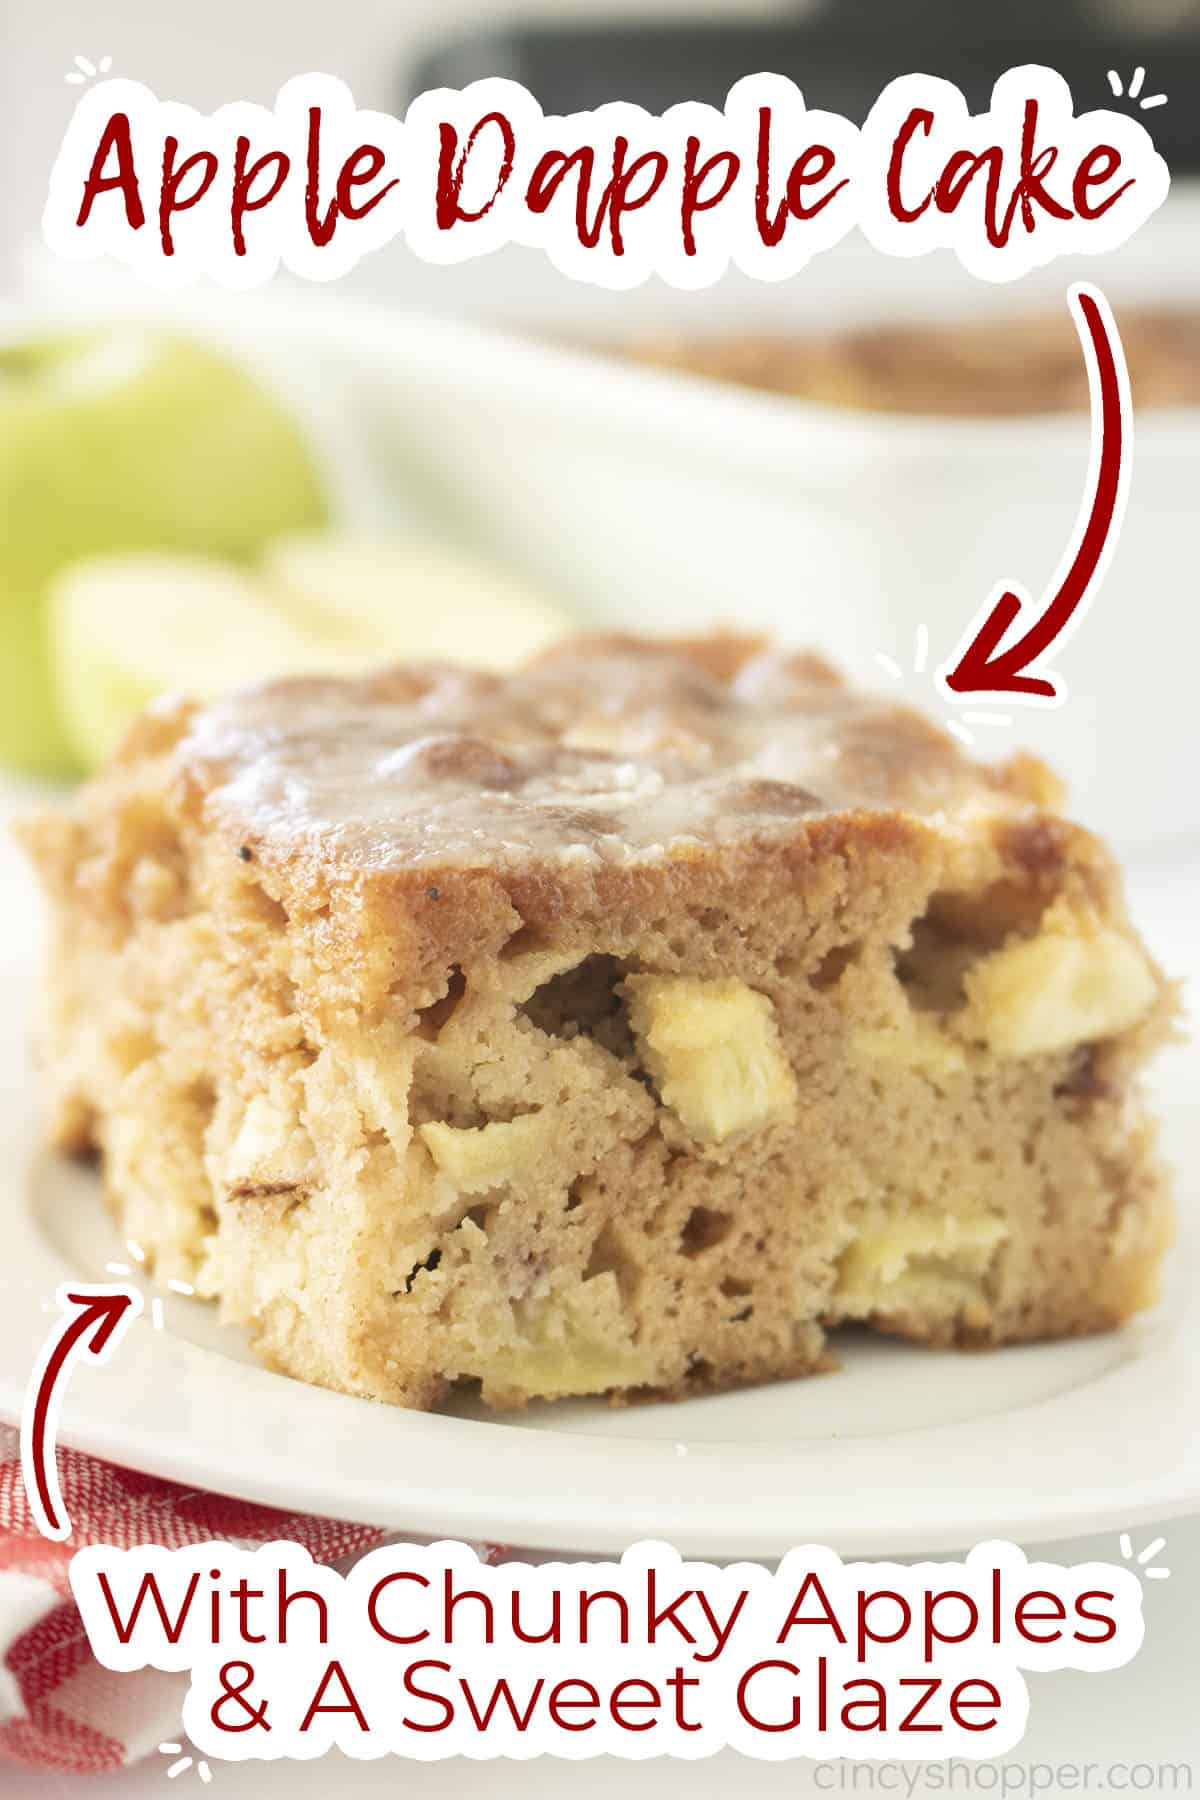 Text on image Apple Dapple Cake with Chunky Apples and a sweet glaze.